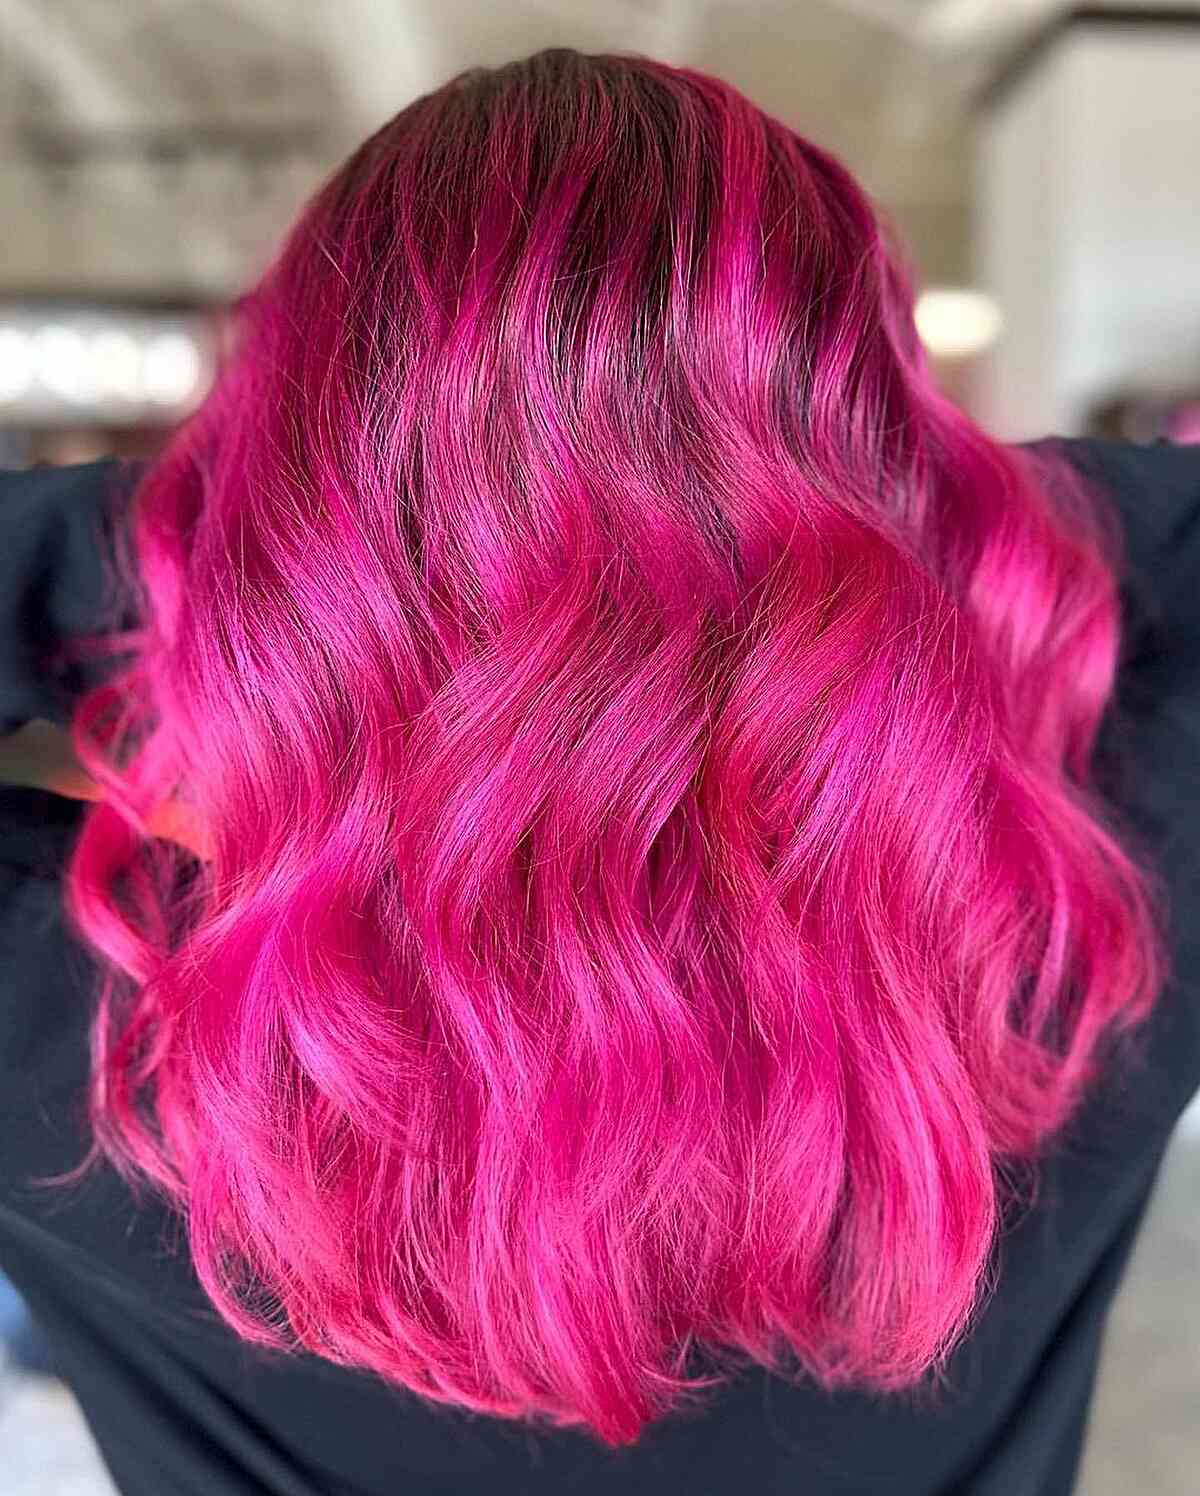 Neon Pink Balayage Hair for girls with long wavy hair